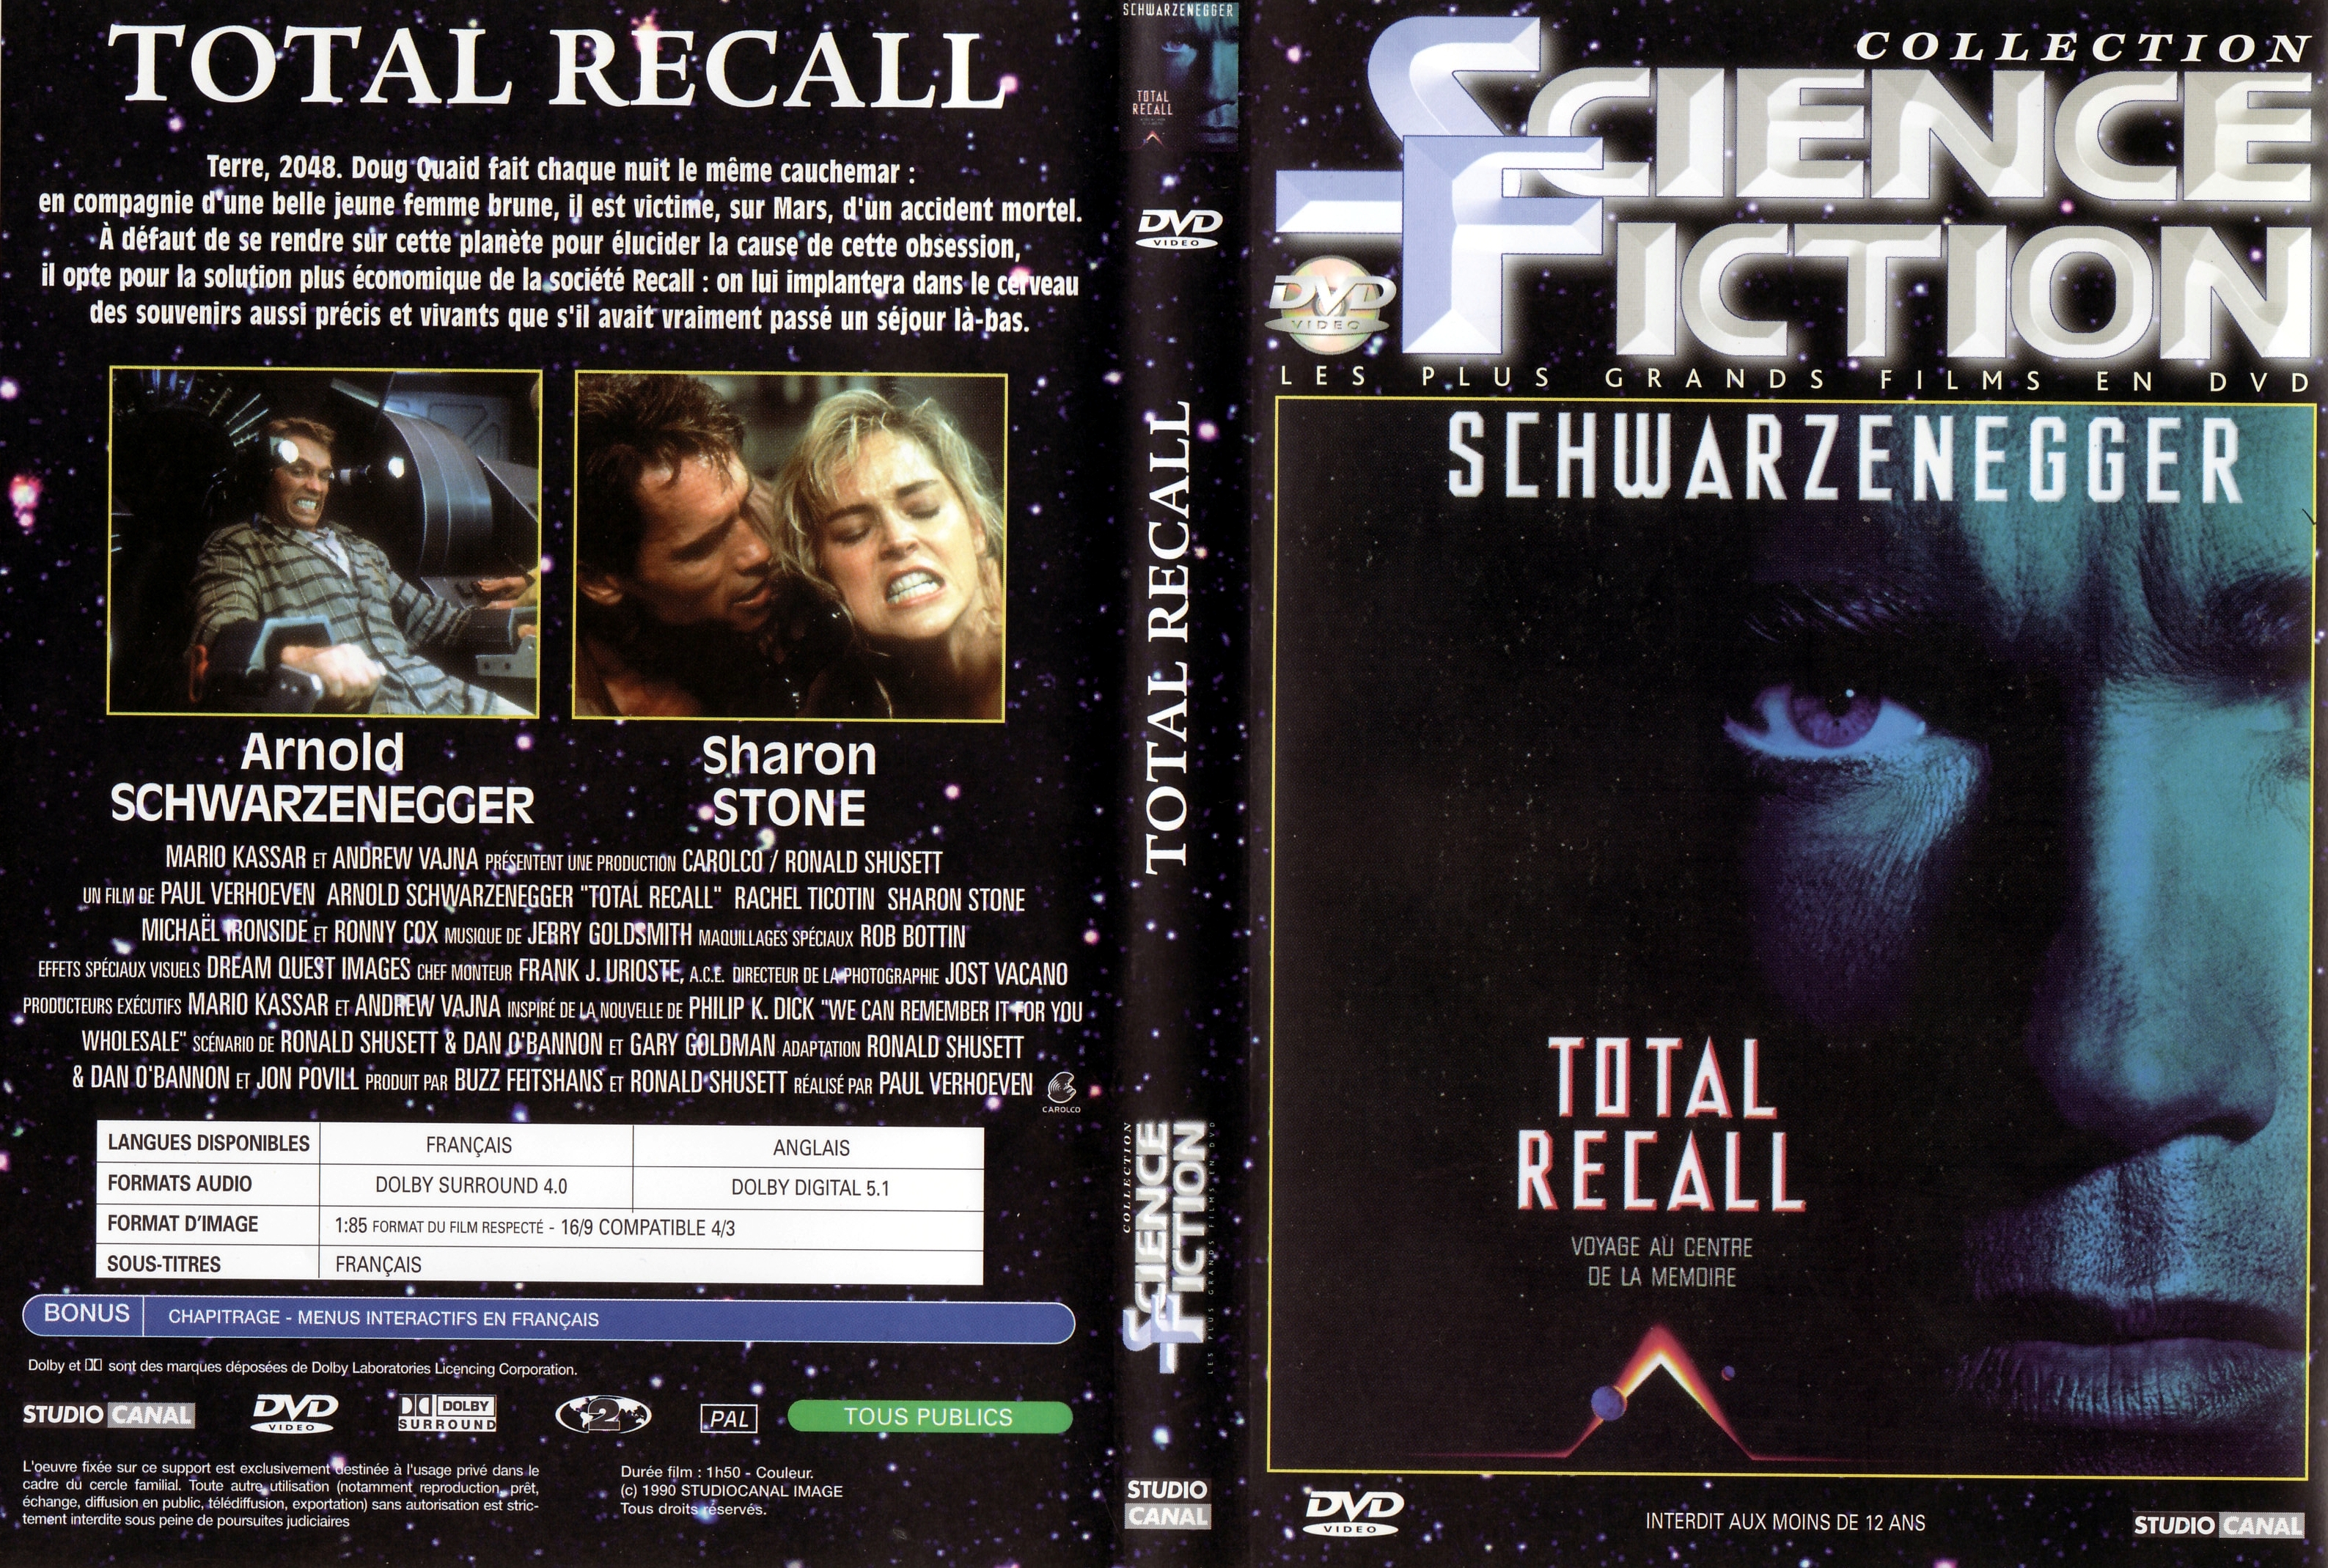 Jaquette DVD Total recall v2